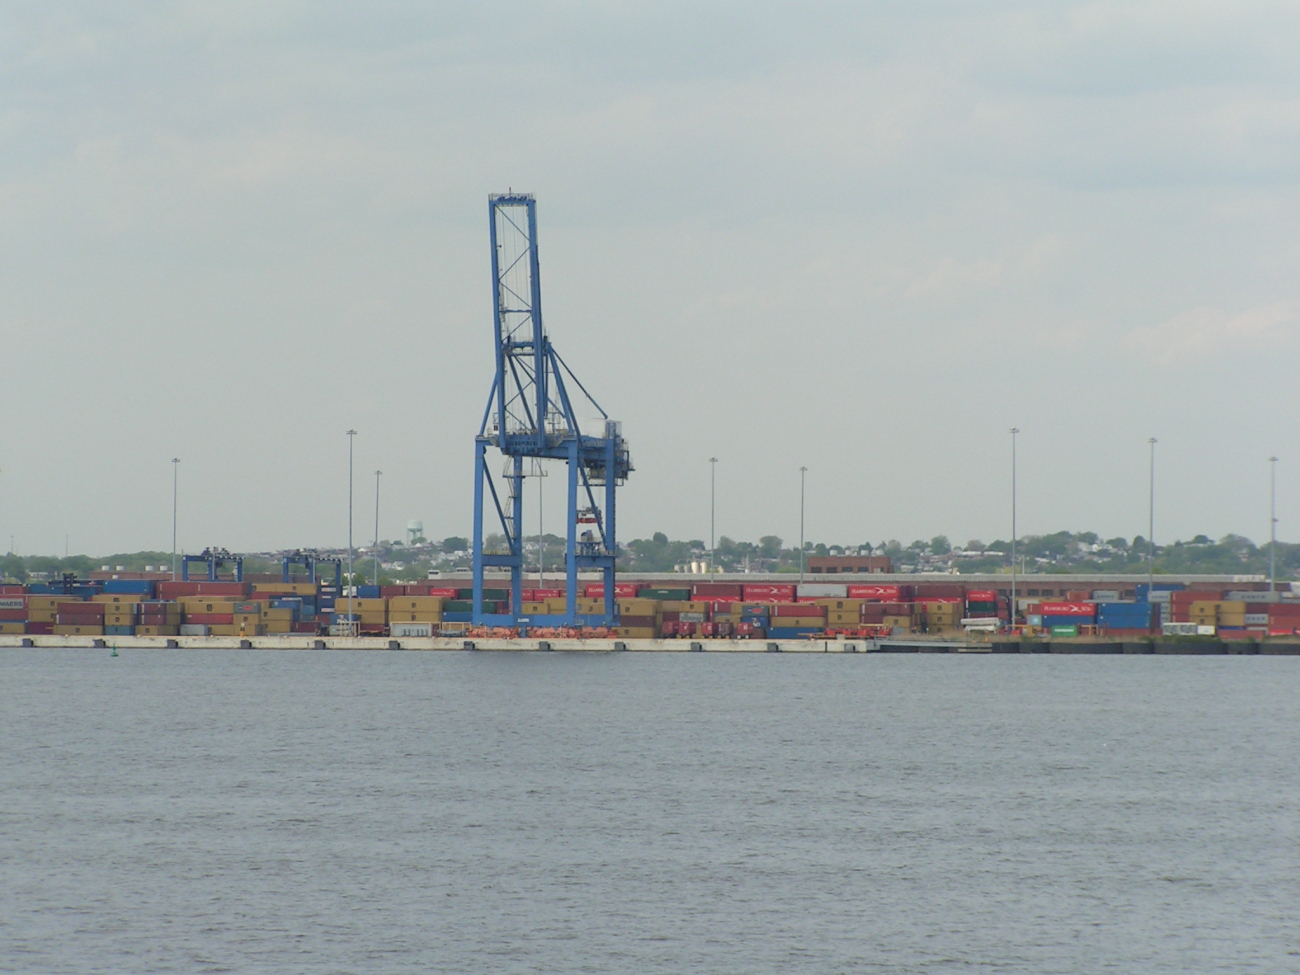 A crane and containers at an East Coast container-ship dock